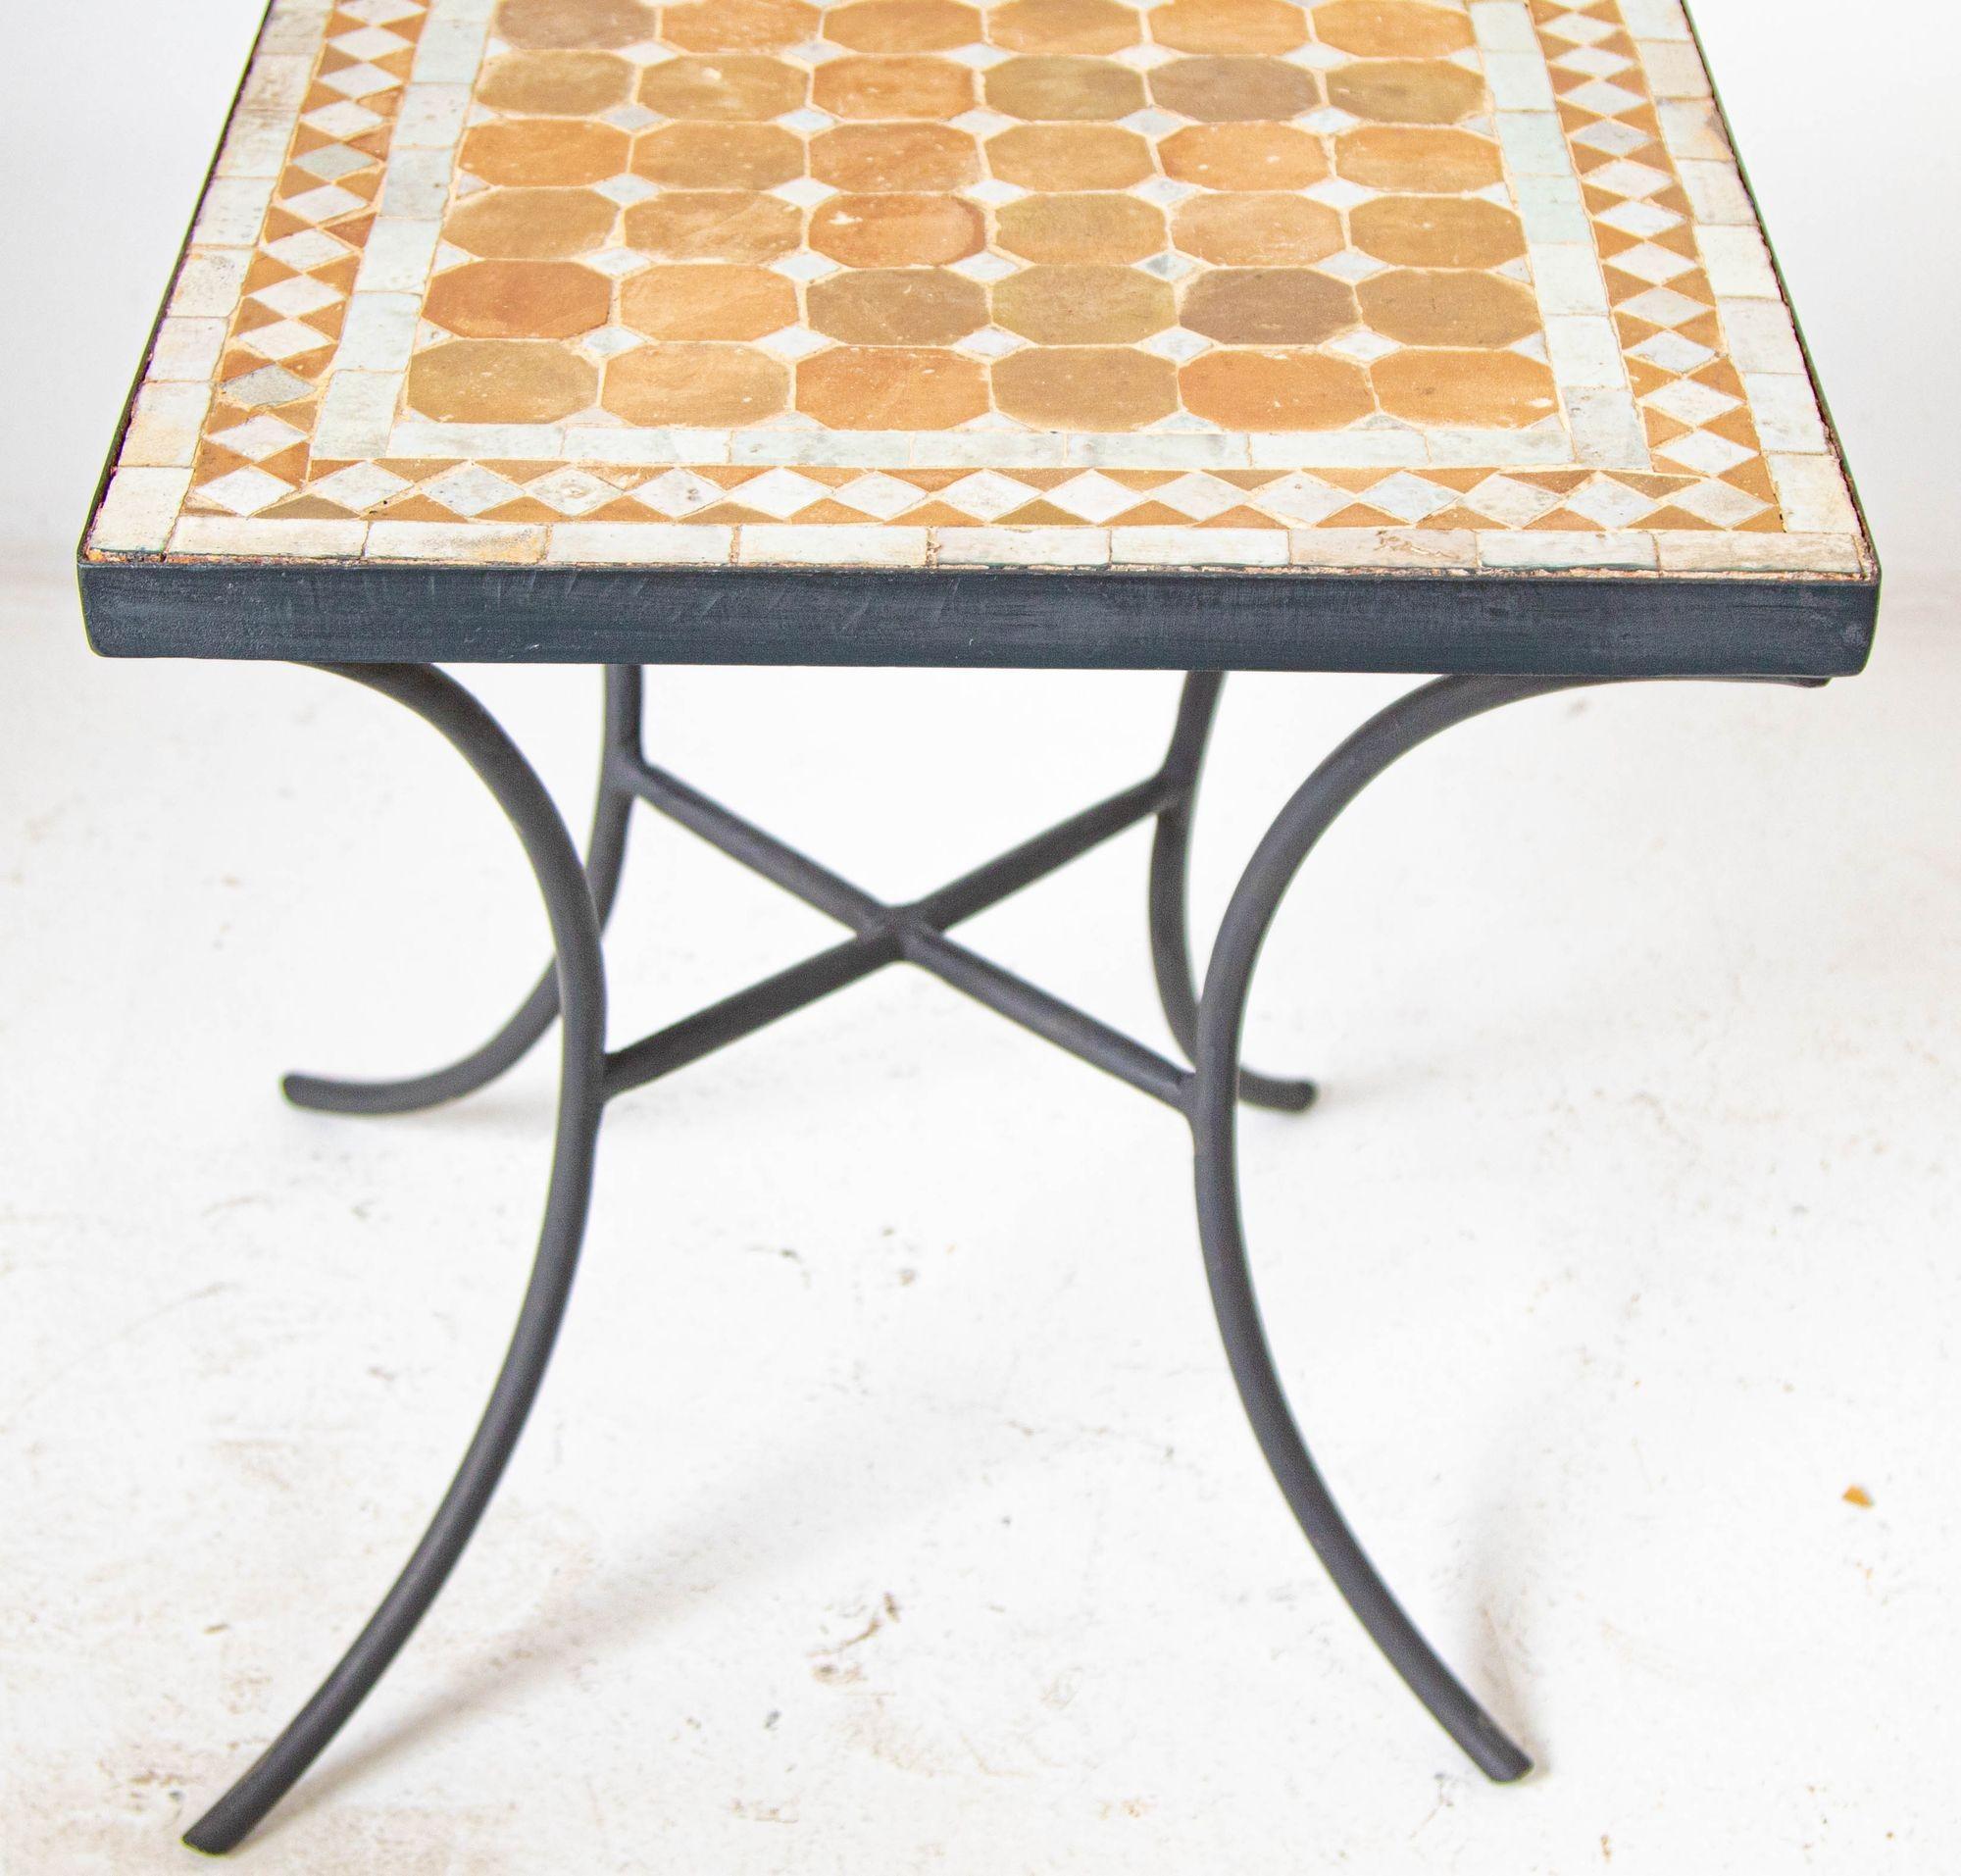 Moroccan Mosaic Tile Table Square Shape Outdoor Side Table 5